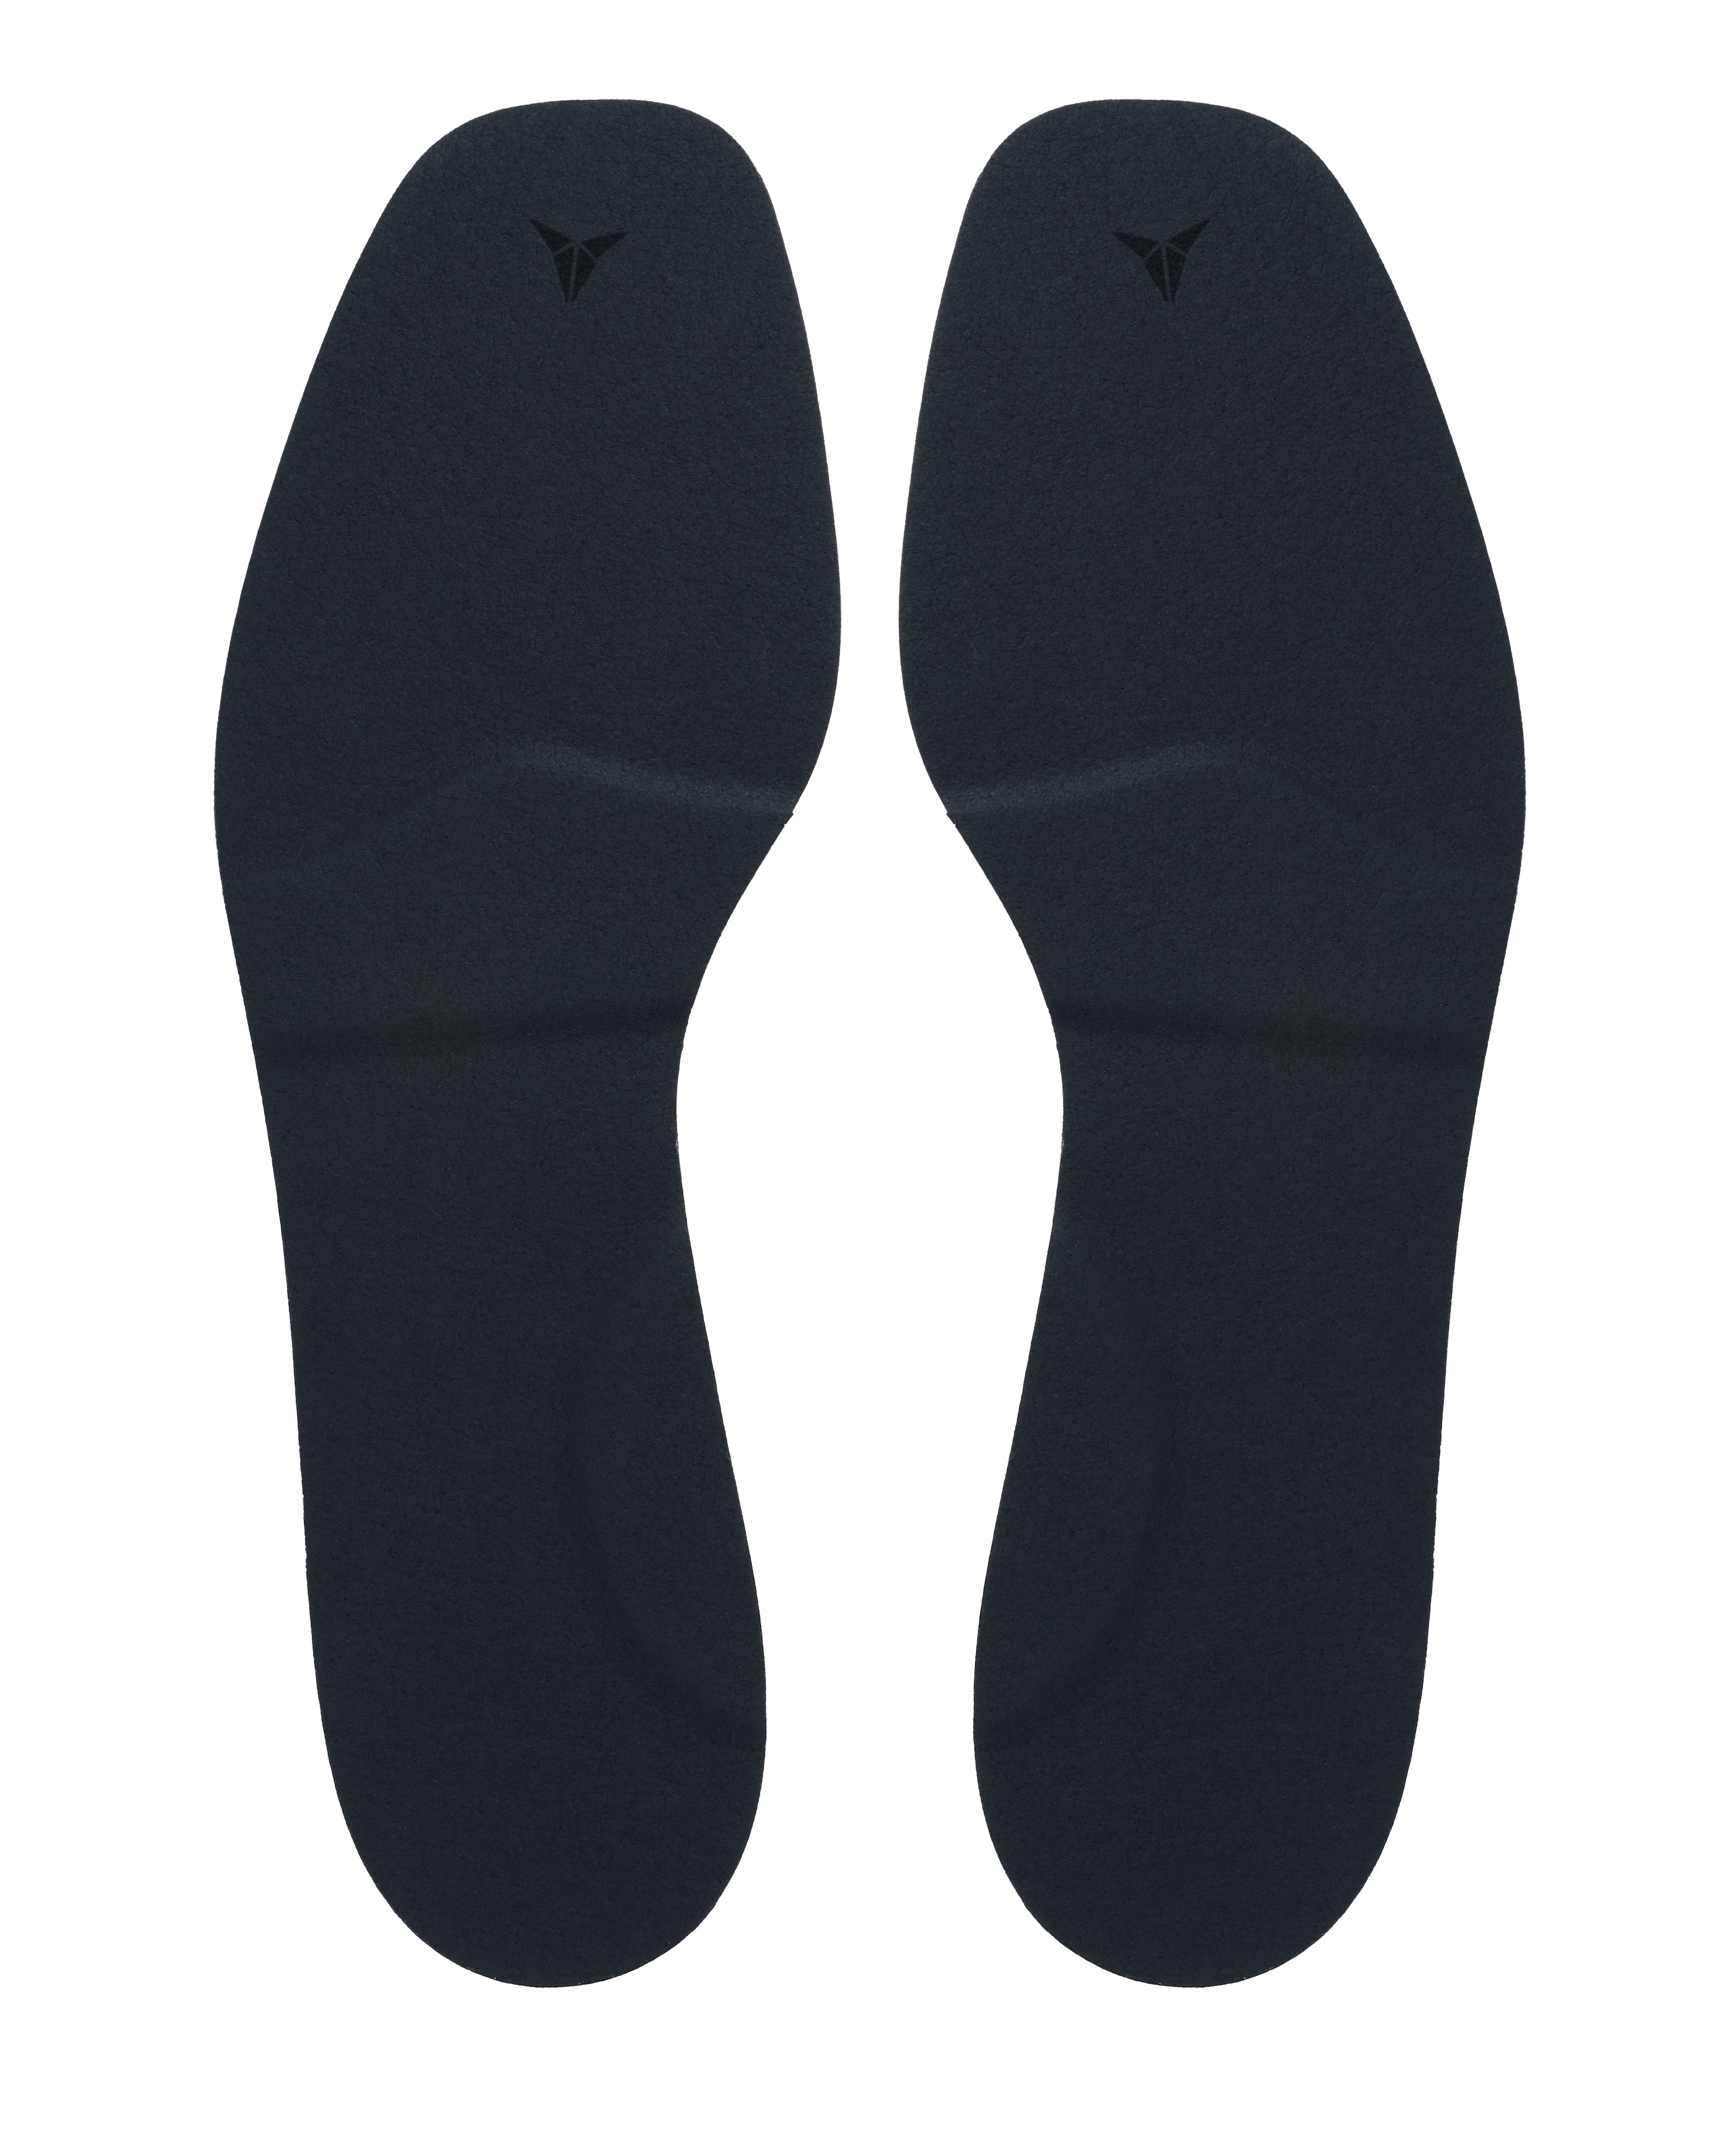 Stand straight and elimiate back pain with Posturepro's insoles.